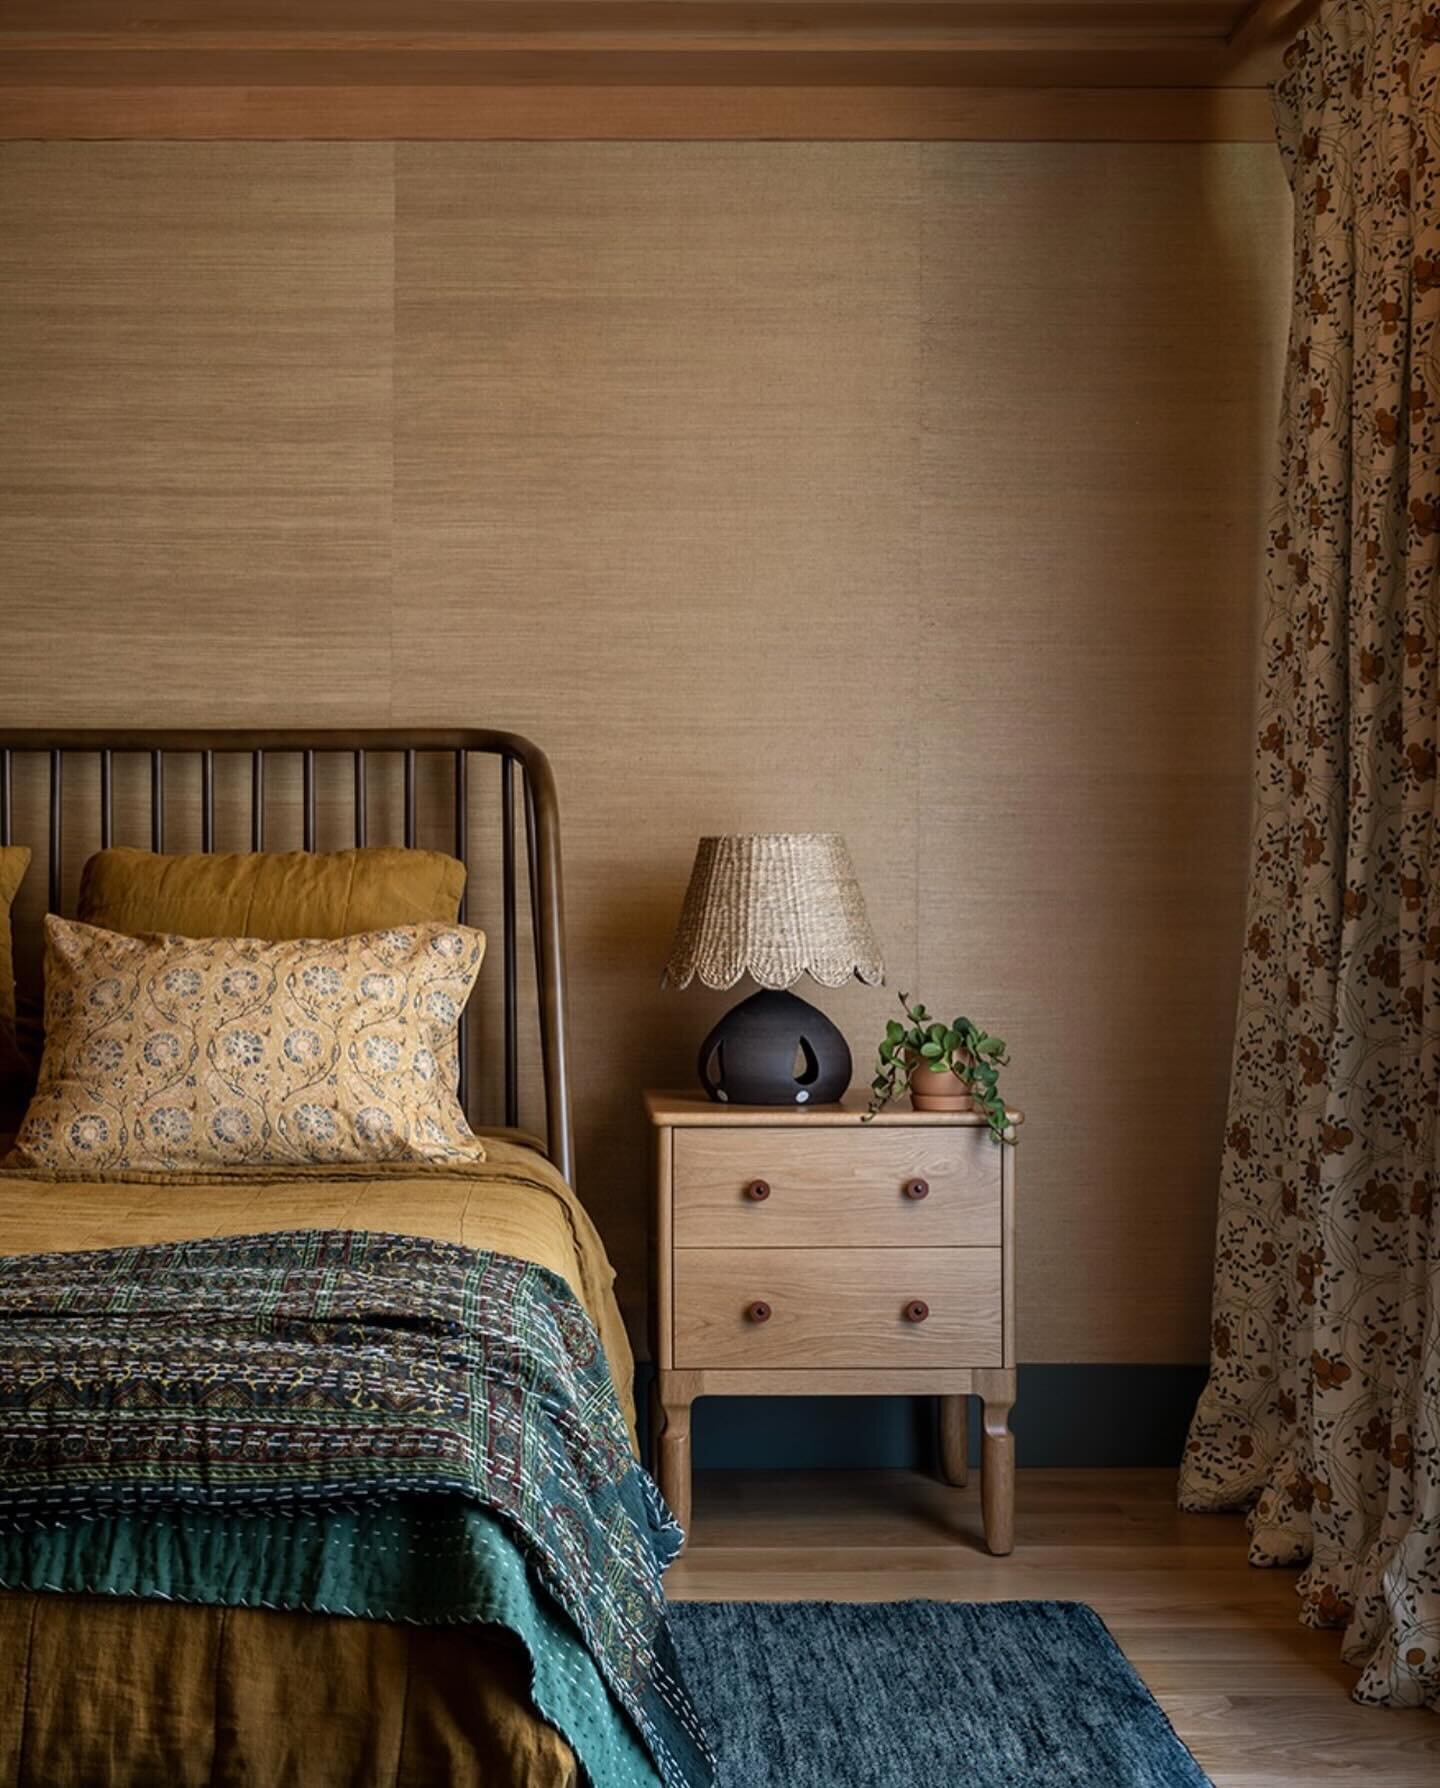 Grasscloth is one of my favorite wall coverings.  It&rsquo;s earthy, natural, textural, warm.  I love the way each panel meets the next; perfectly imperfect.  It feels right for a lot of different types of houses too.  Here it continues the warm hug 